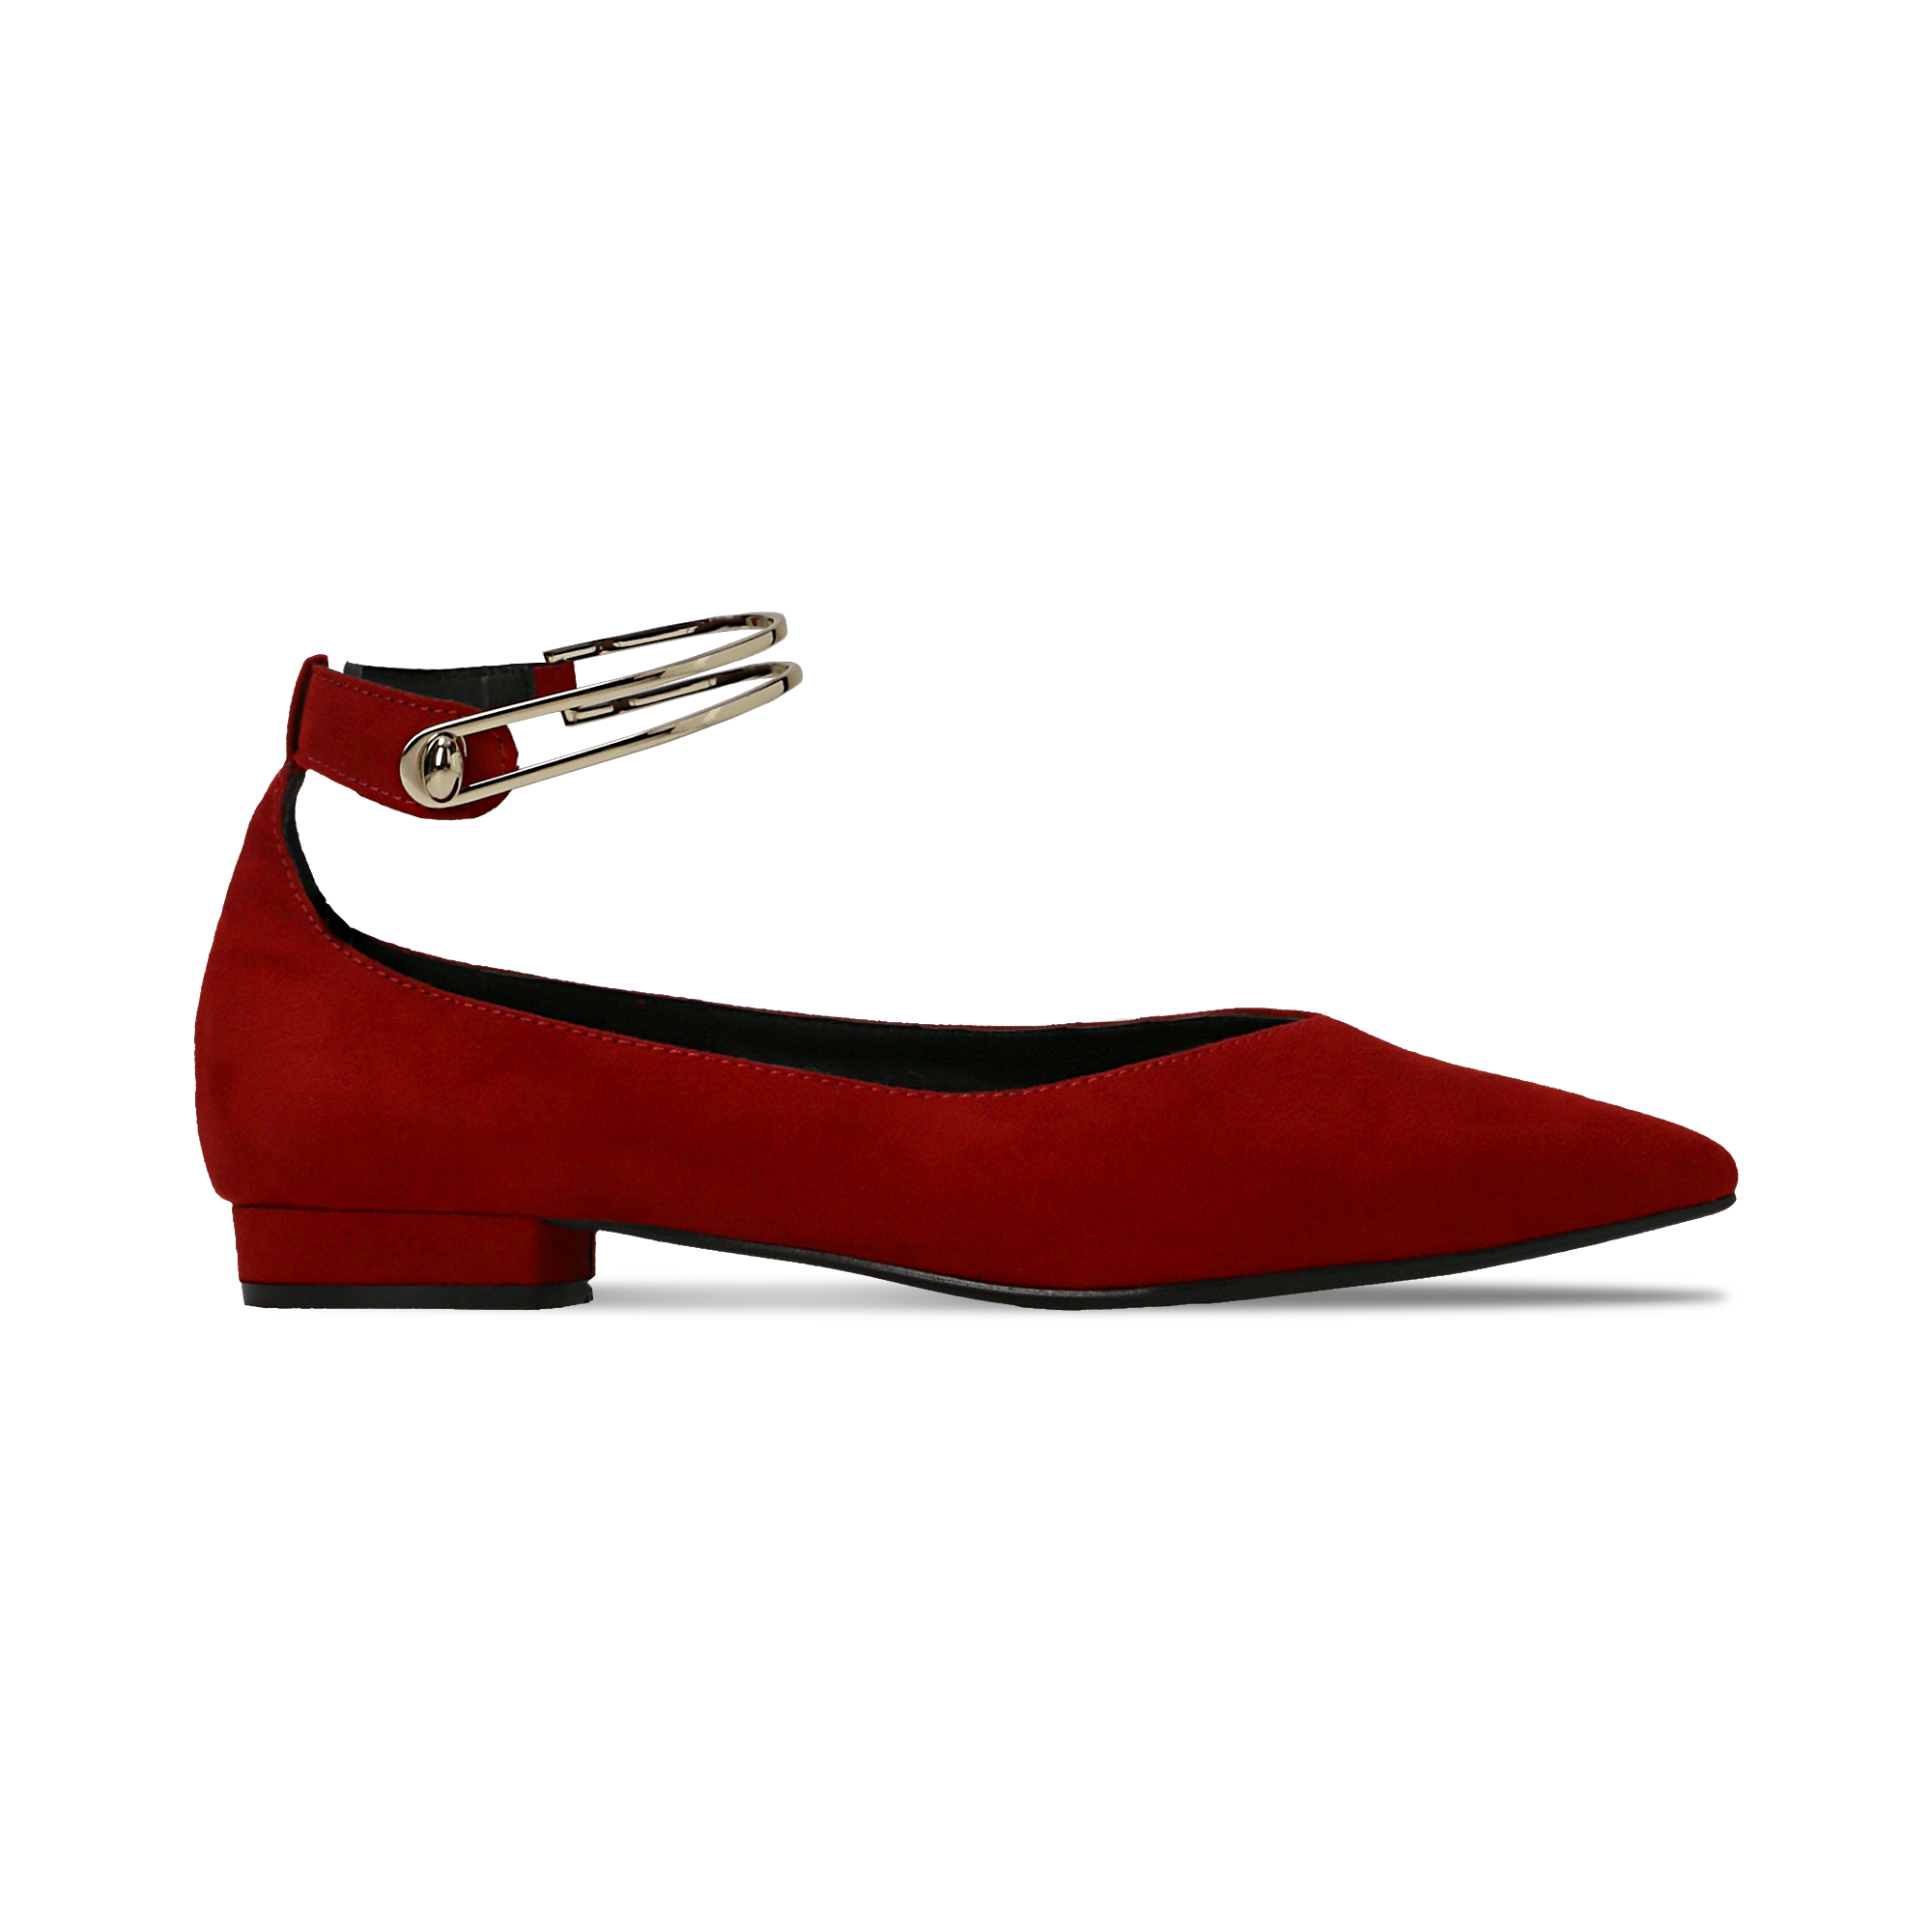 Ballerine Rosse Donna Tacco Basso - Cod. 124971303MFROSS | Primadonna  Collection